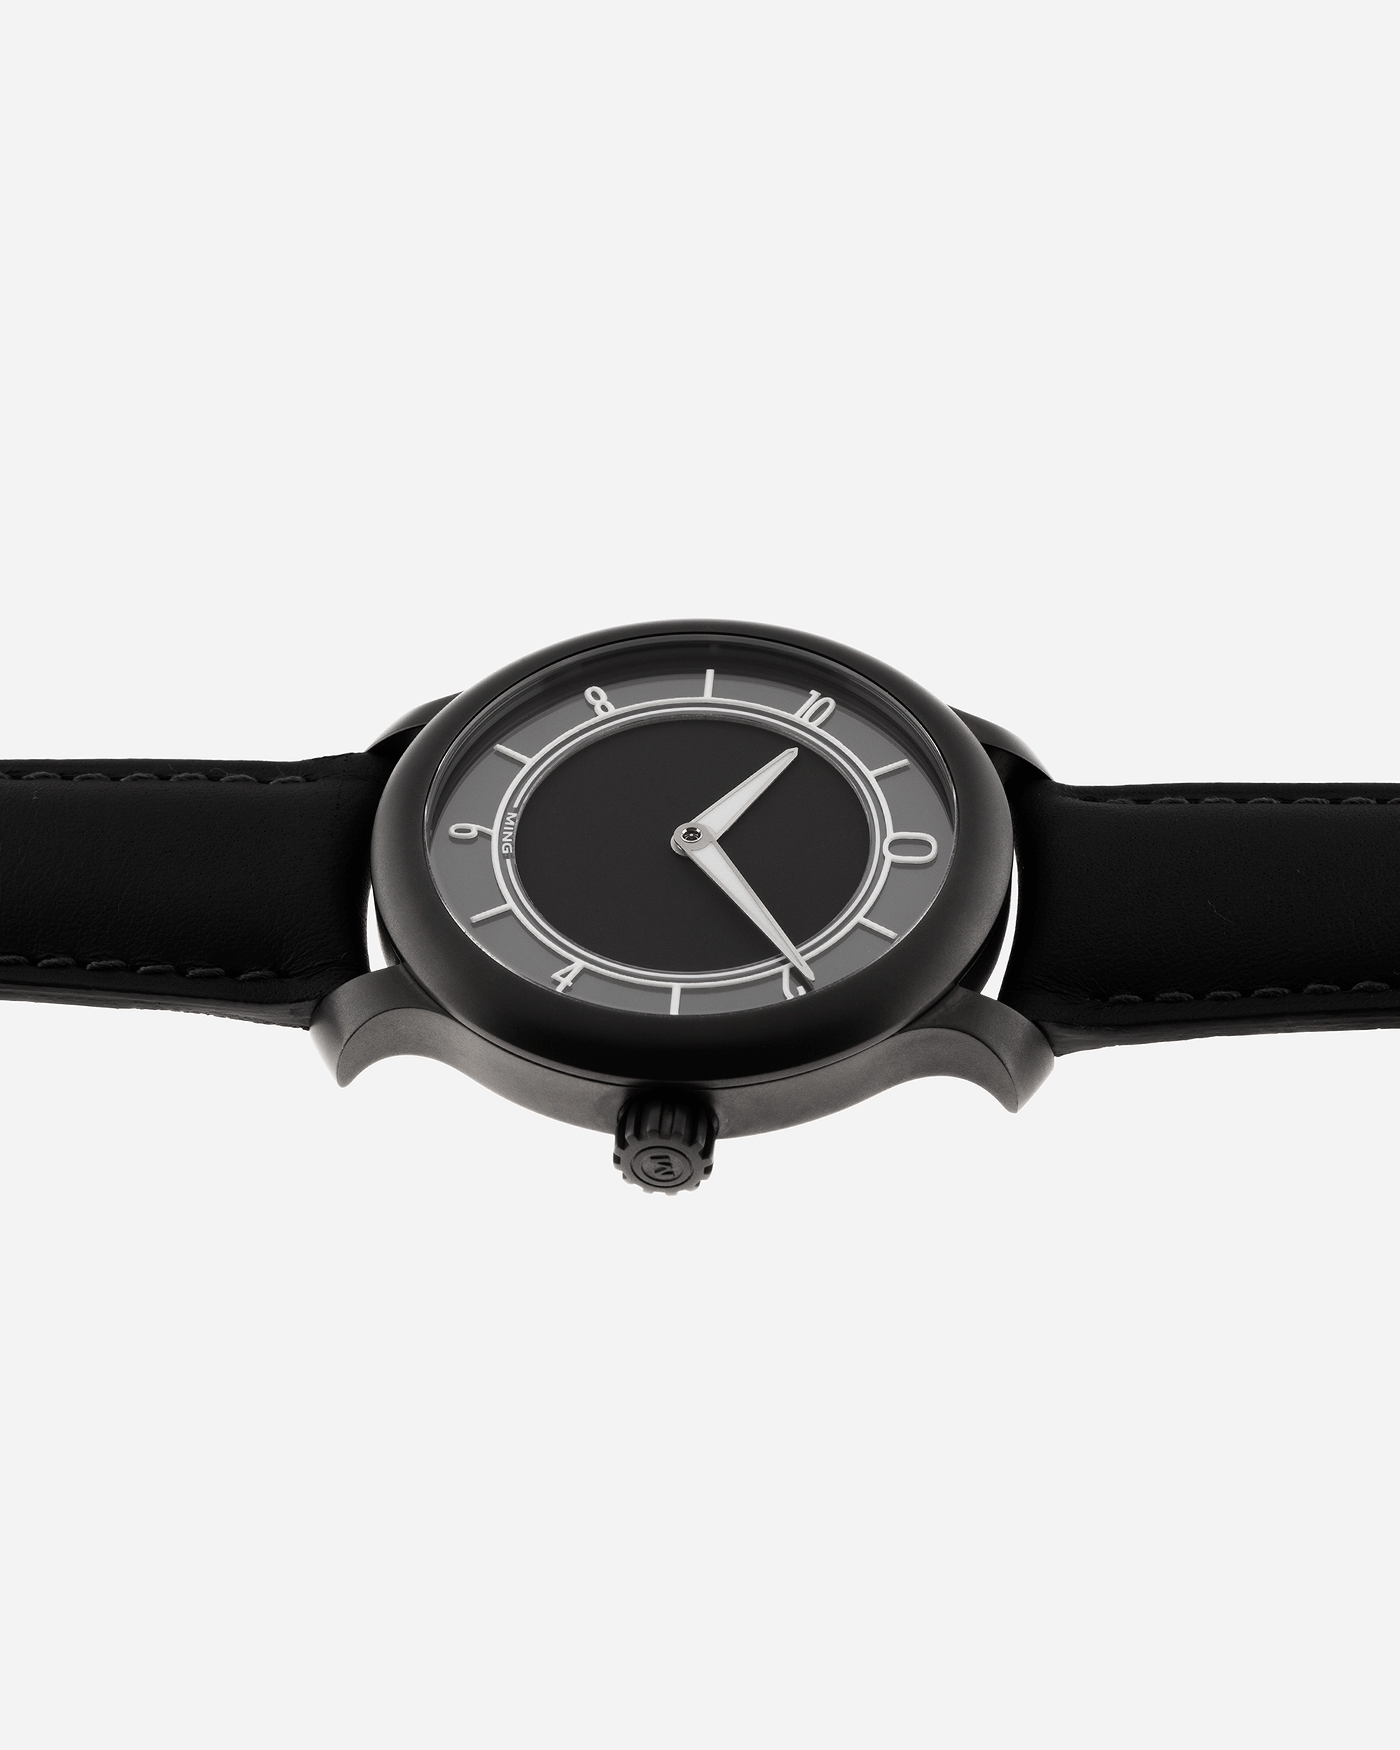 Brand: Ming Year: 2019 Model: 17.06 Monolith Material: Stainless Steel Movement: Heavily Modified ETA 2824-2 Case Diameter: 38mm Strap: Jean Rousseau Black Calf Strap for MING